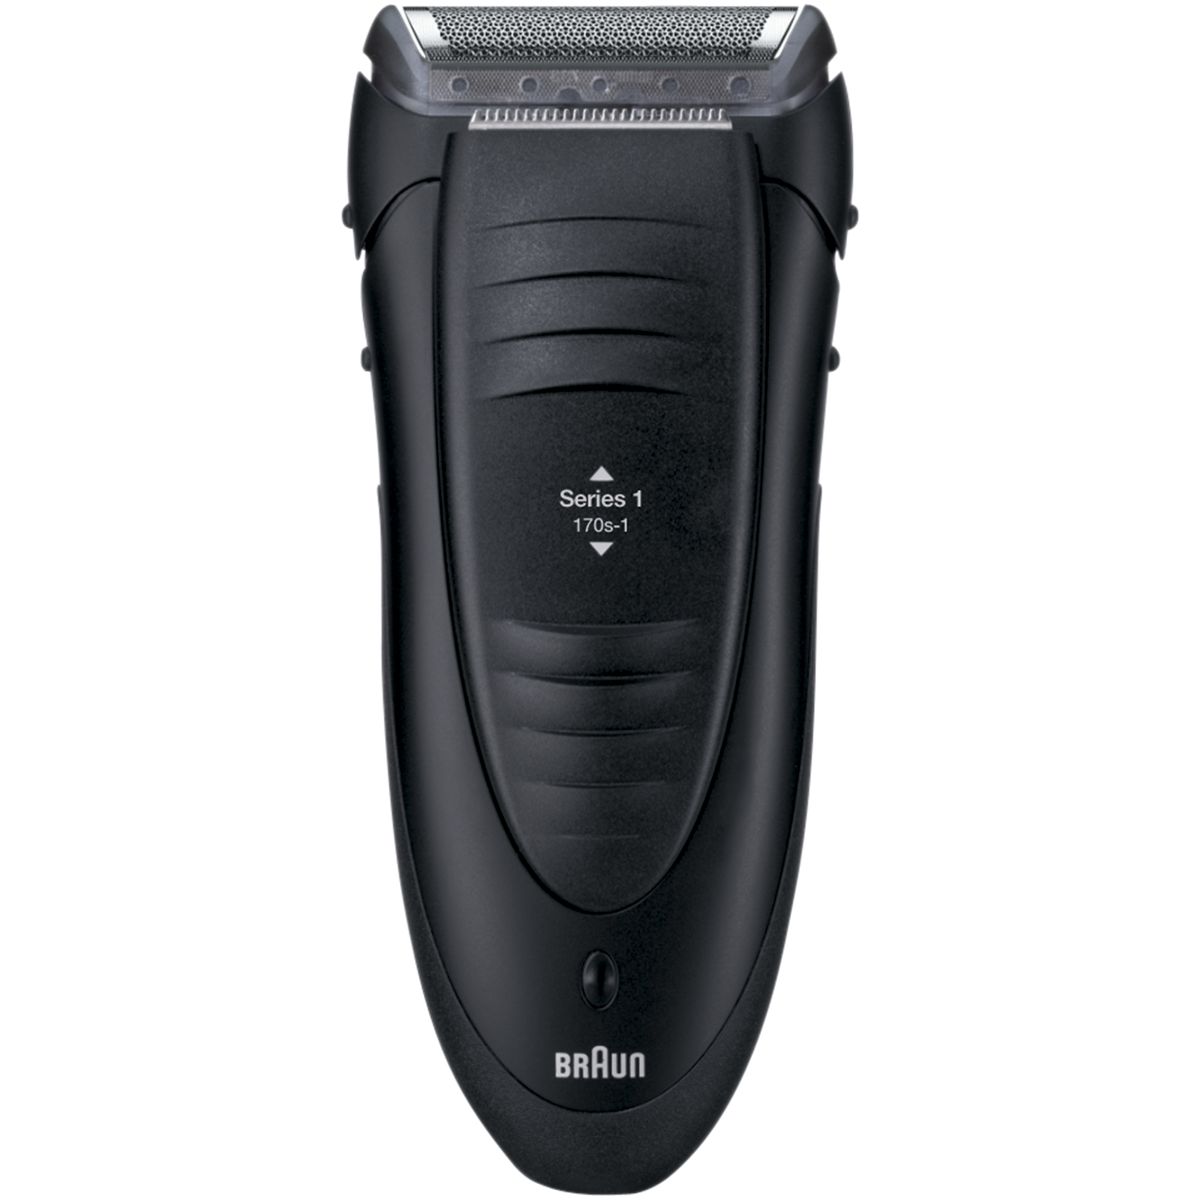 Braun Series 1 Mens Electric Shaver with Long Hair Trimmer, Electric Shaver with Mains Operated, 170s, Black